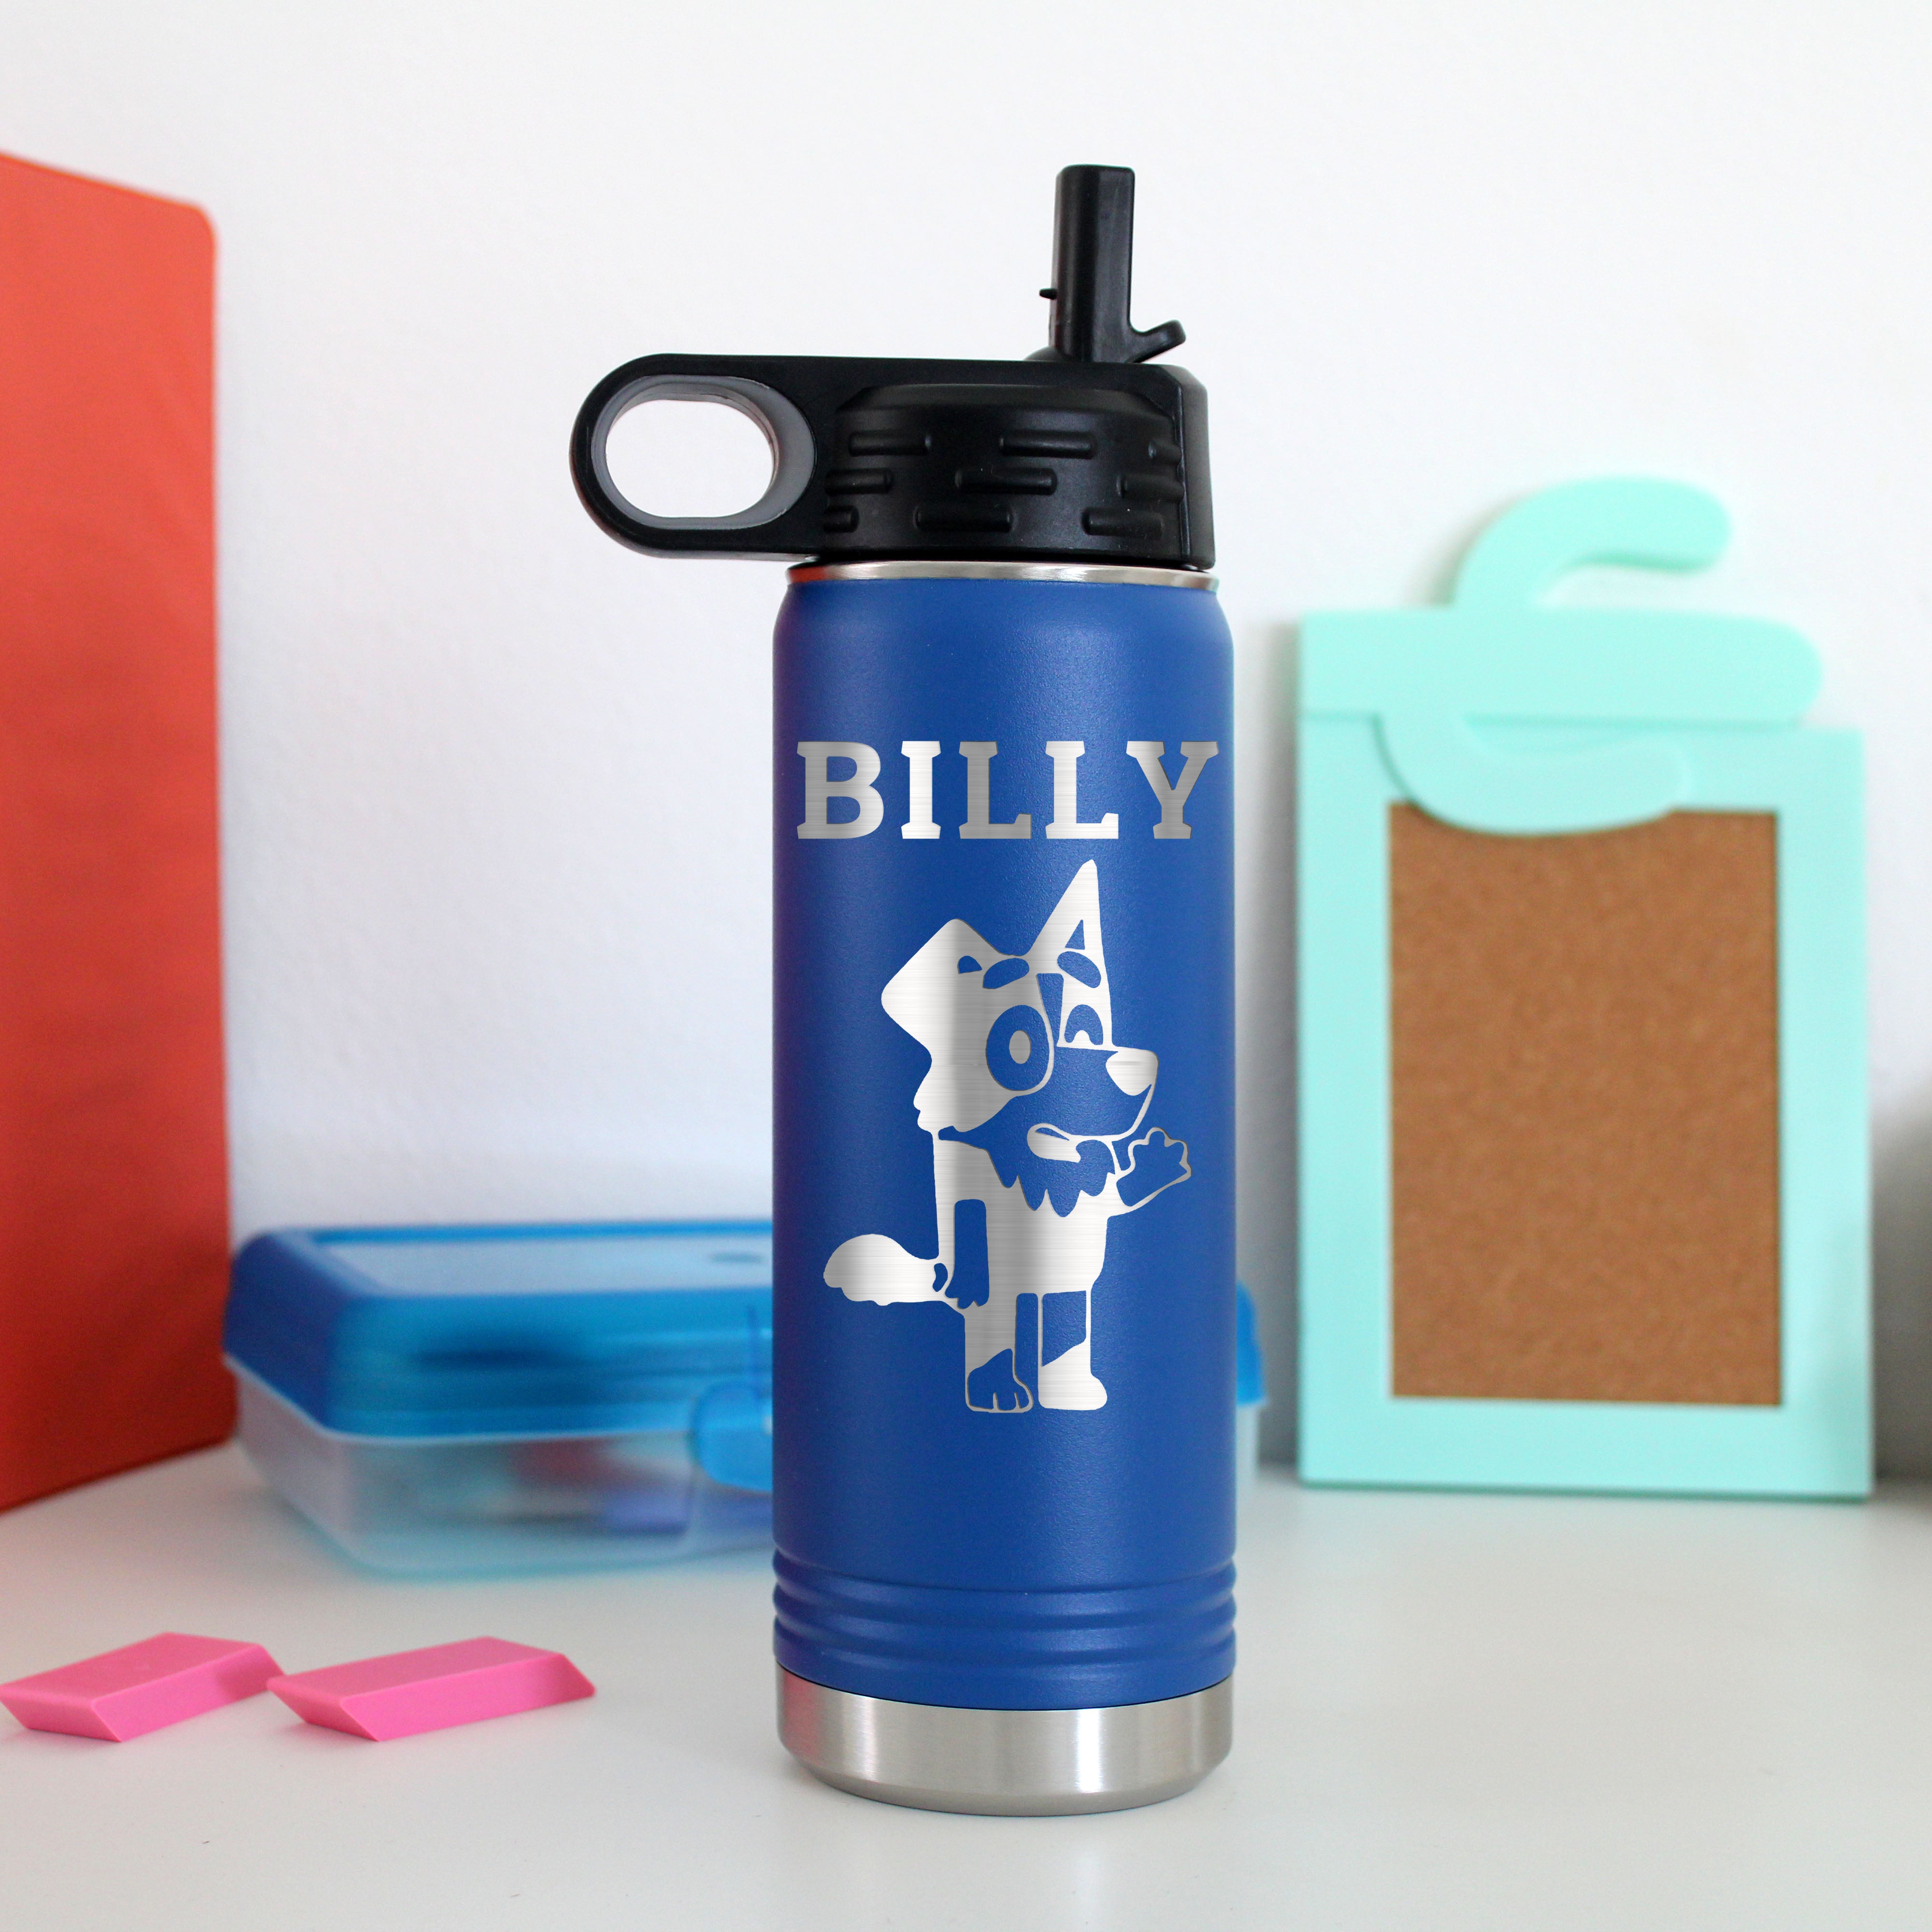  The First Years Bluey Insulated Straw Cup - Bluey